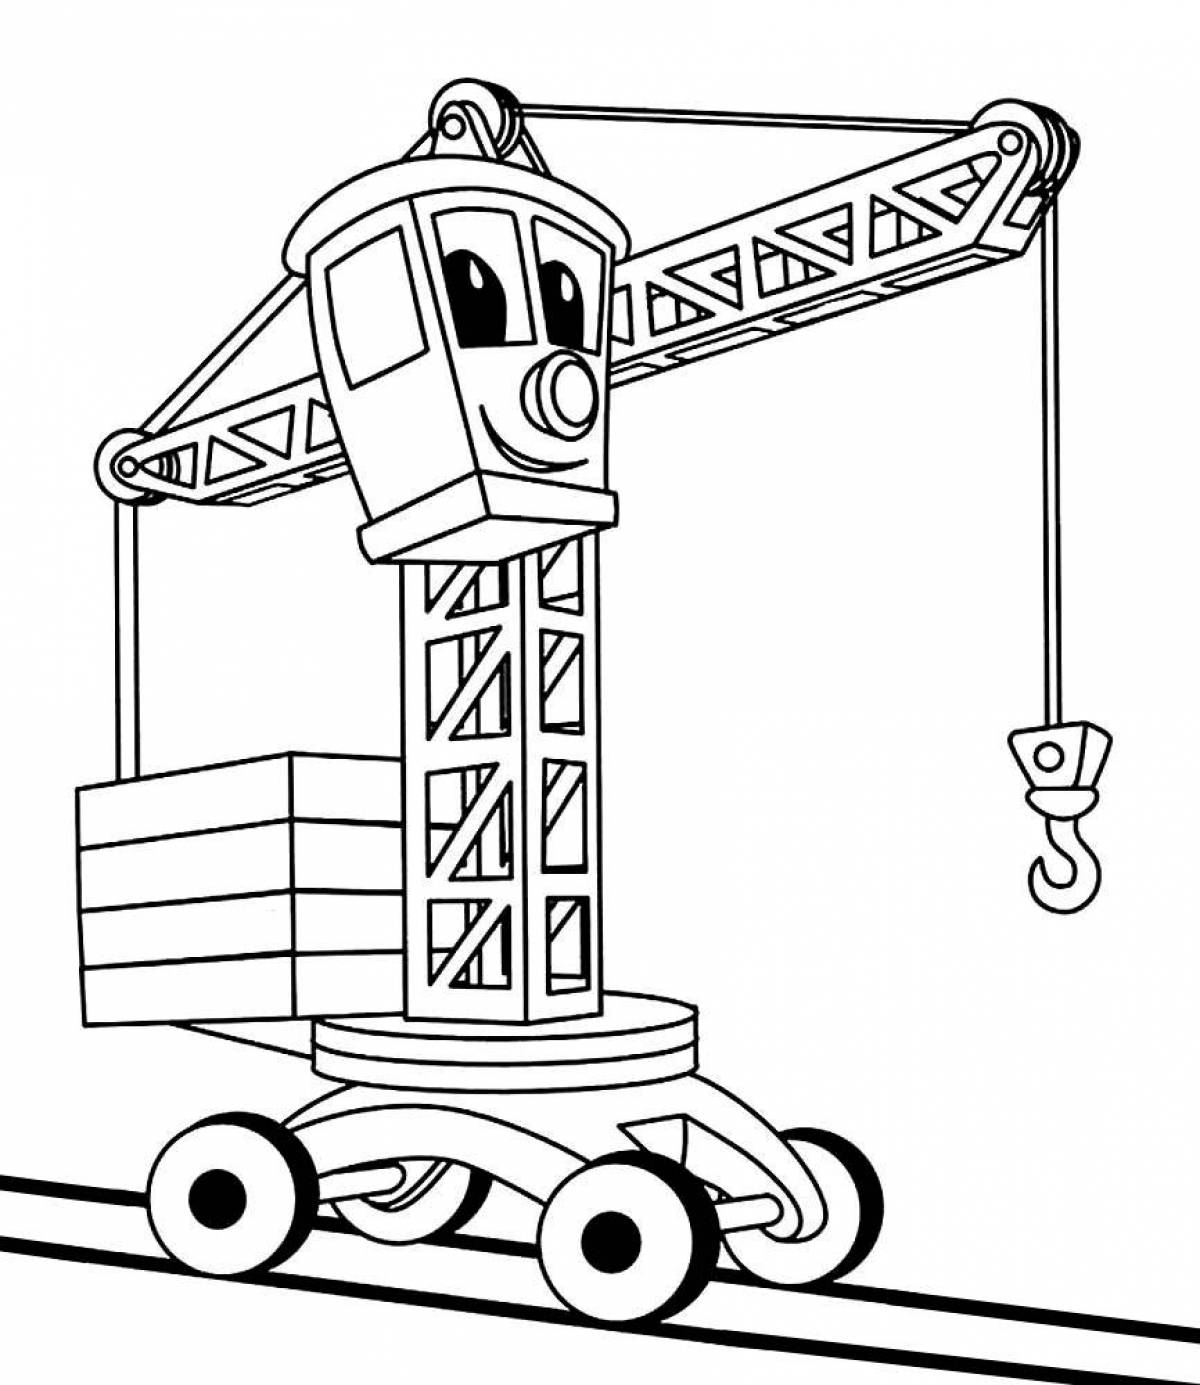 Glowing crane coloring page